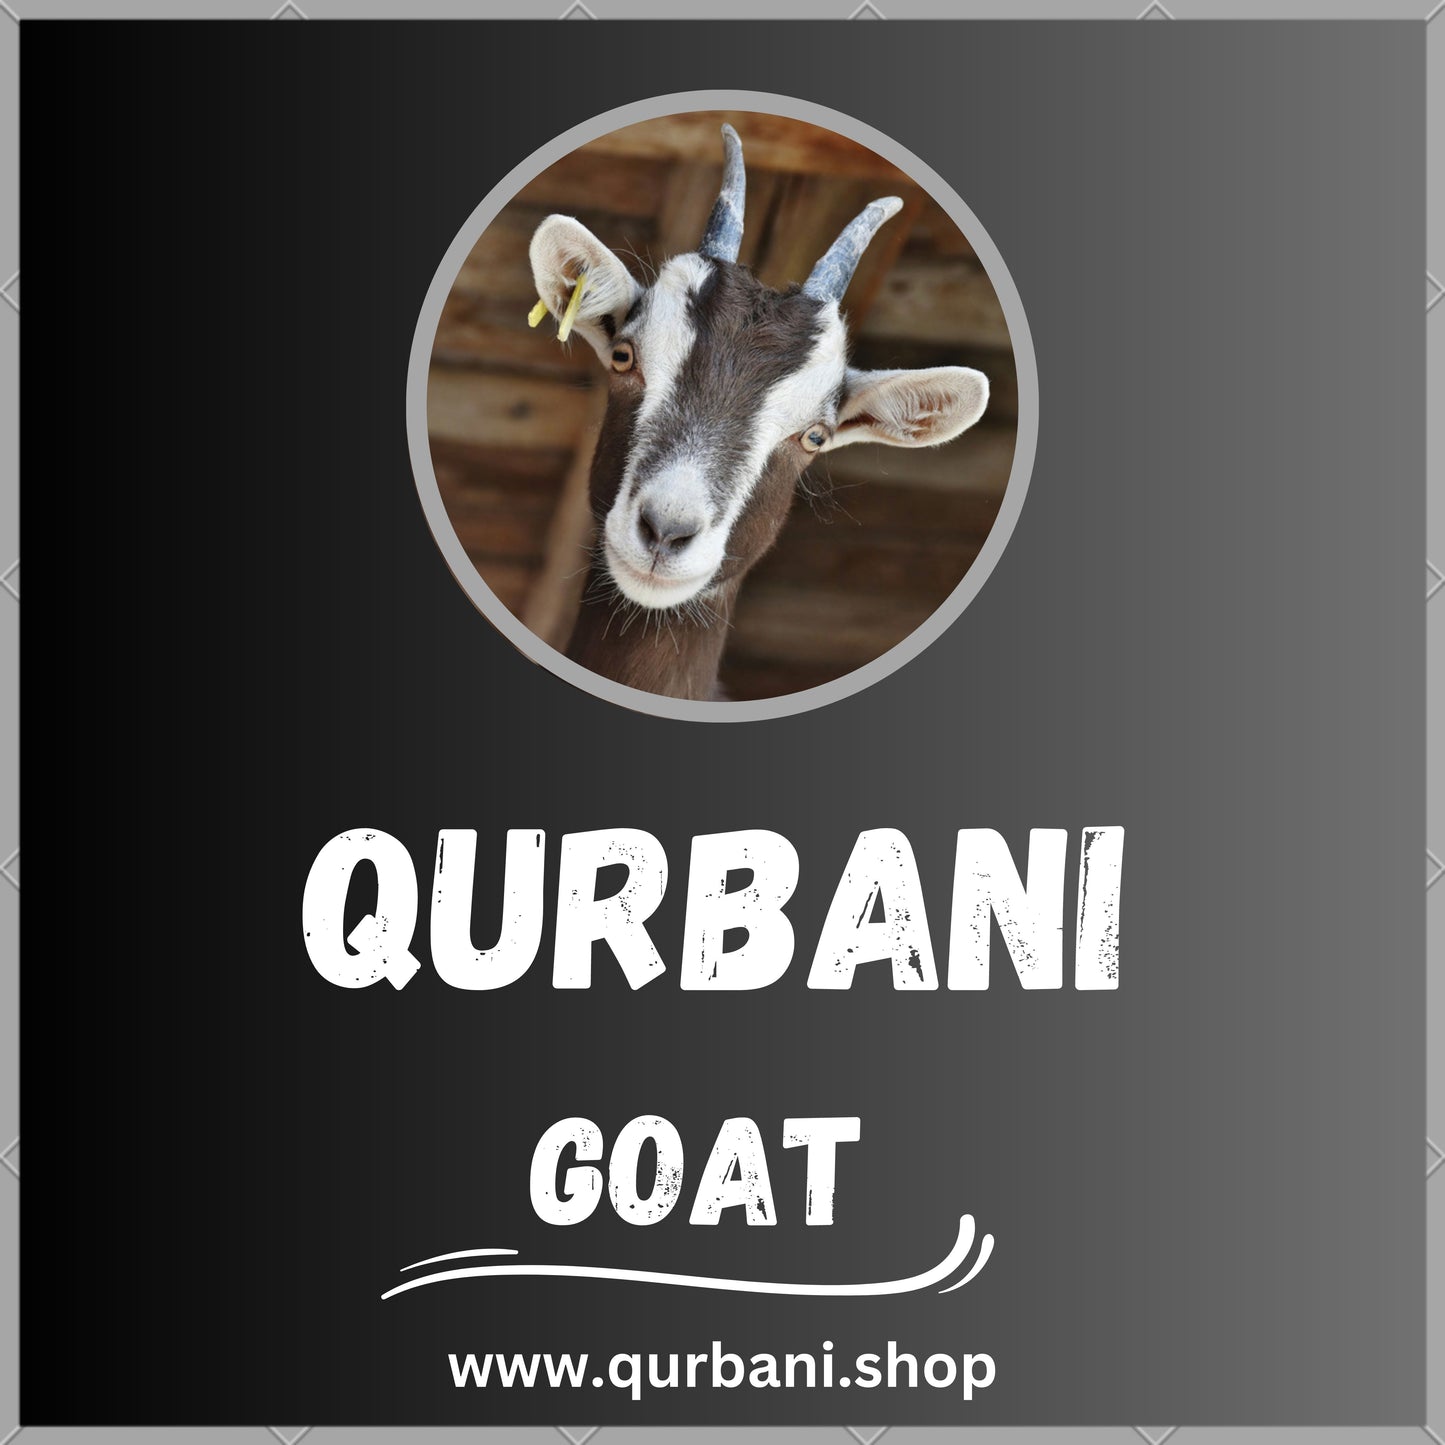 Trusted Qurbani Services in Paterson - Order Your Eid-ul-Adha Sacrifice Today!